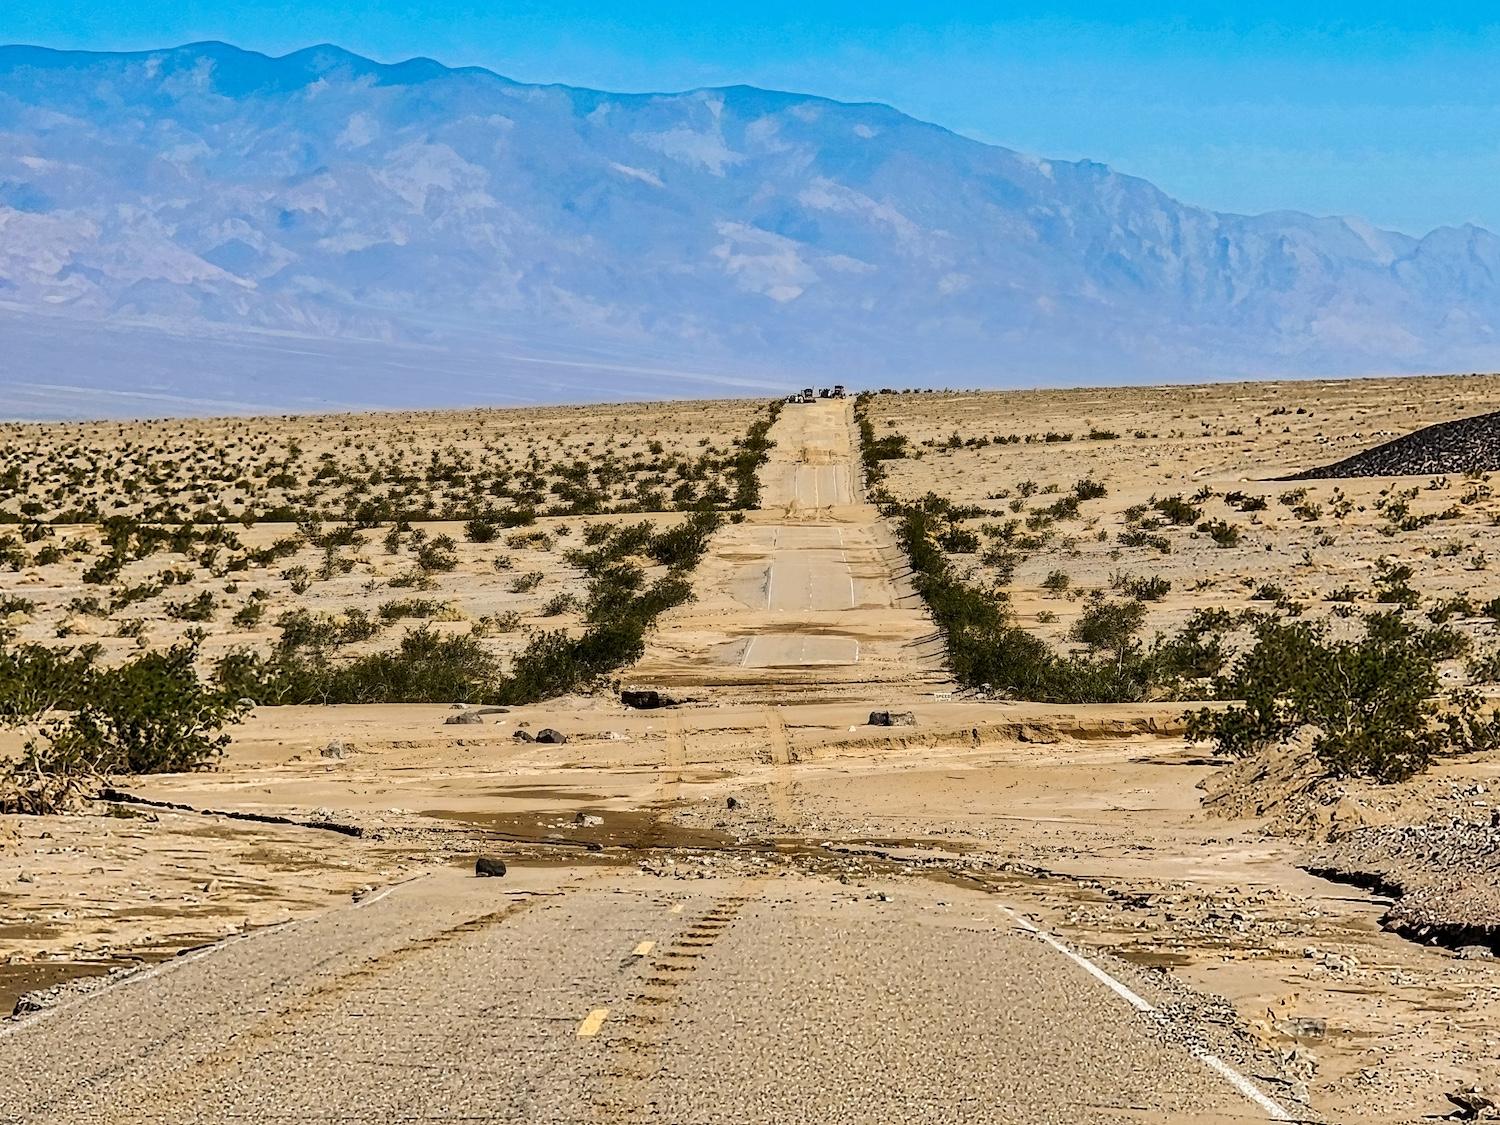 Racing down the steep slopes of the Amargosa Range, floodwaters roared across every low point on Badwater Road south of Furnace Creek, California, in Death Valley National Park.